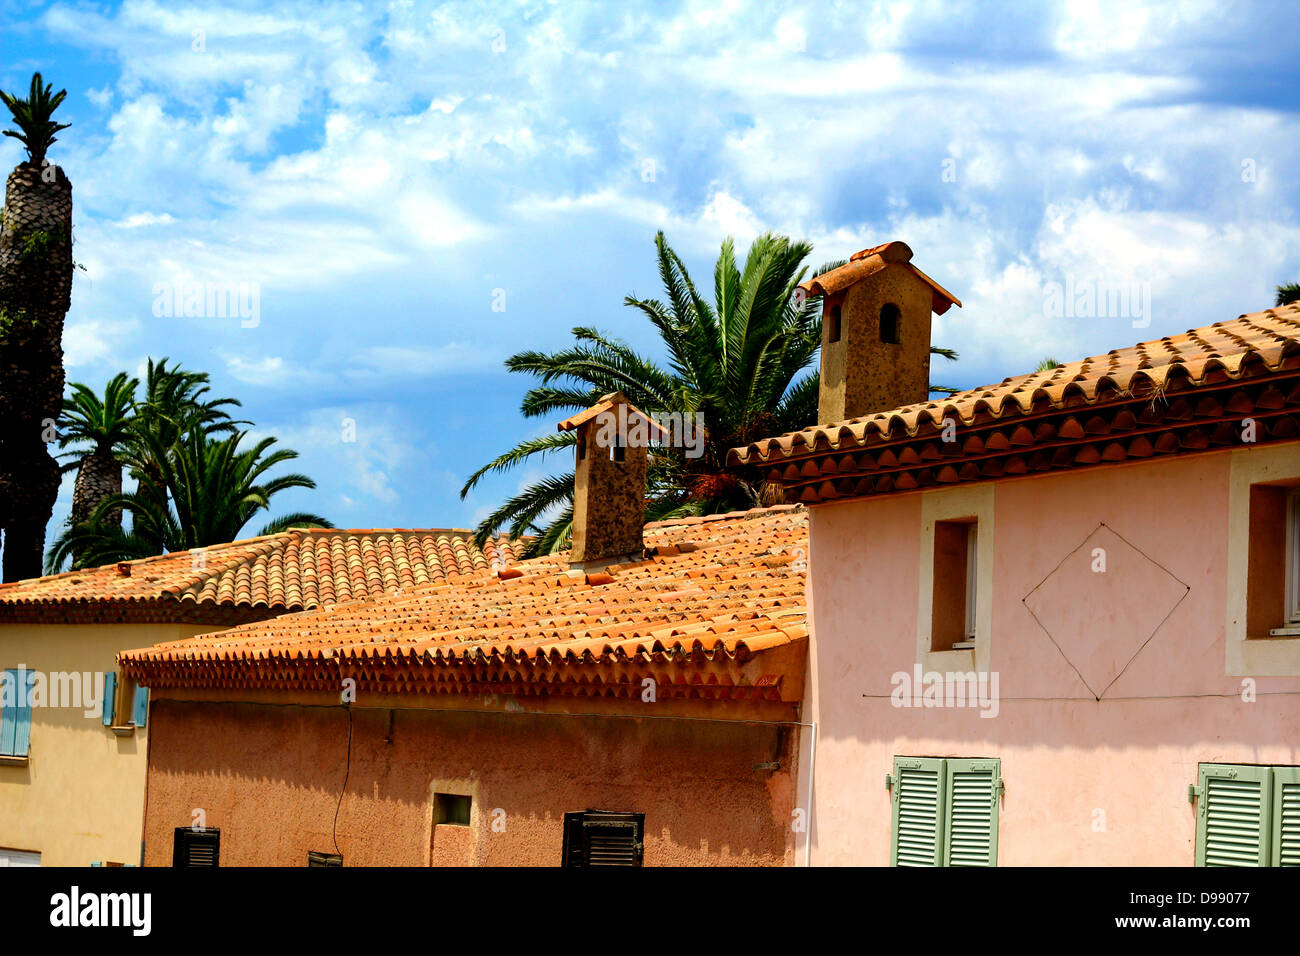 Sunny noon at Porquerolles island - view over tiled roof tops. Côte d’Azur, French Riviera Stock Photo